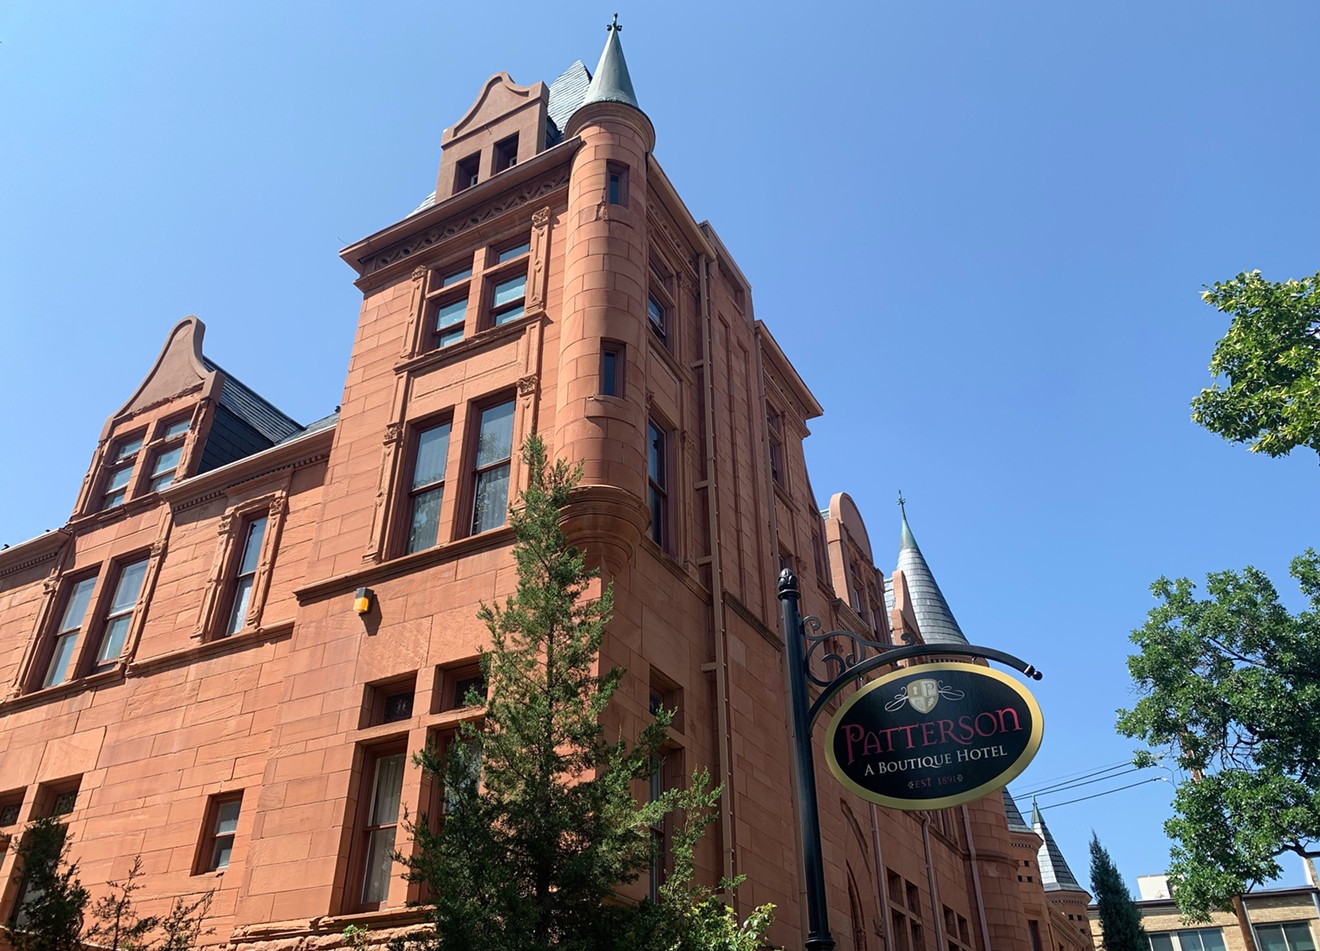 The Patterson Inn, currently a hot spot for ghost tours, could add a marijuana lounge, if the owner gets what he wants.